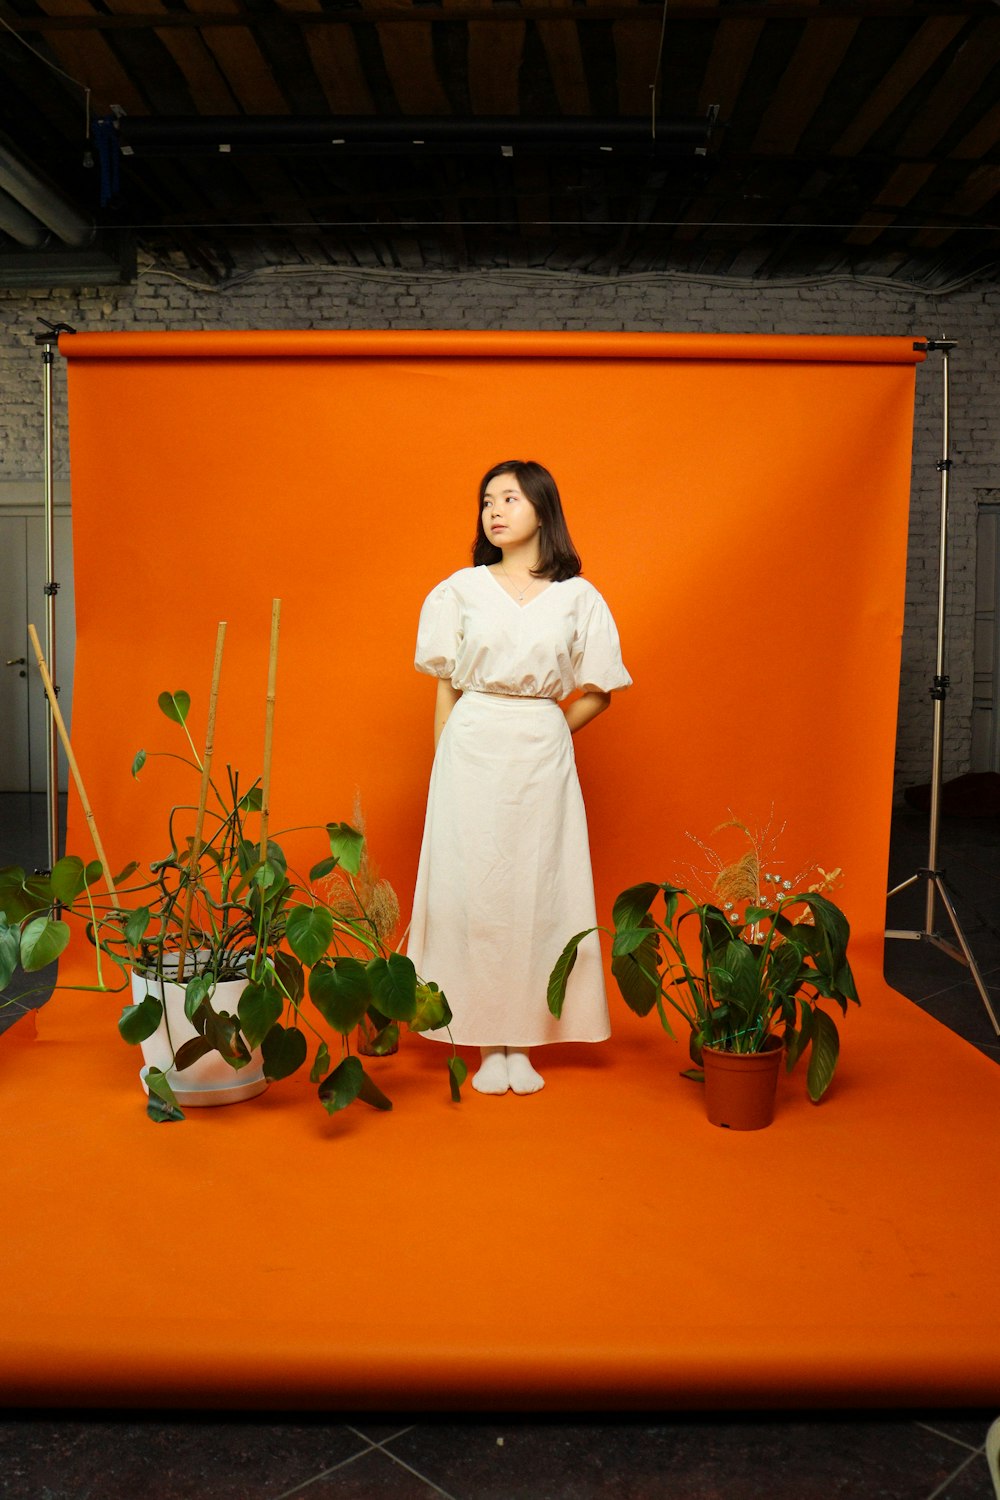 a woman in a white dress standing in front of an orange backdrop